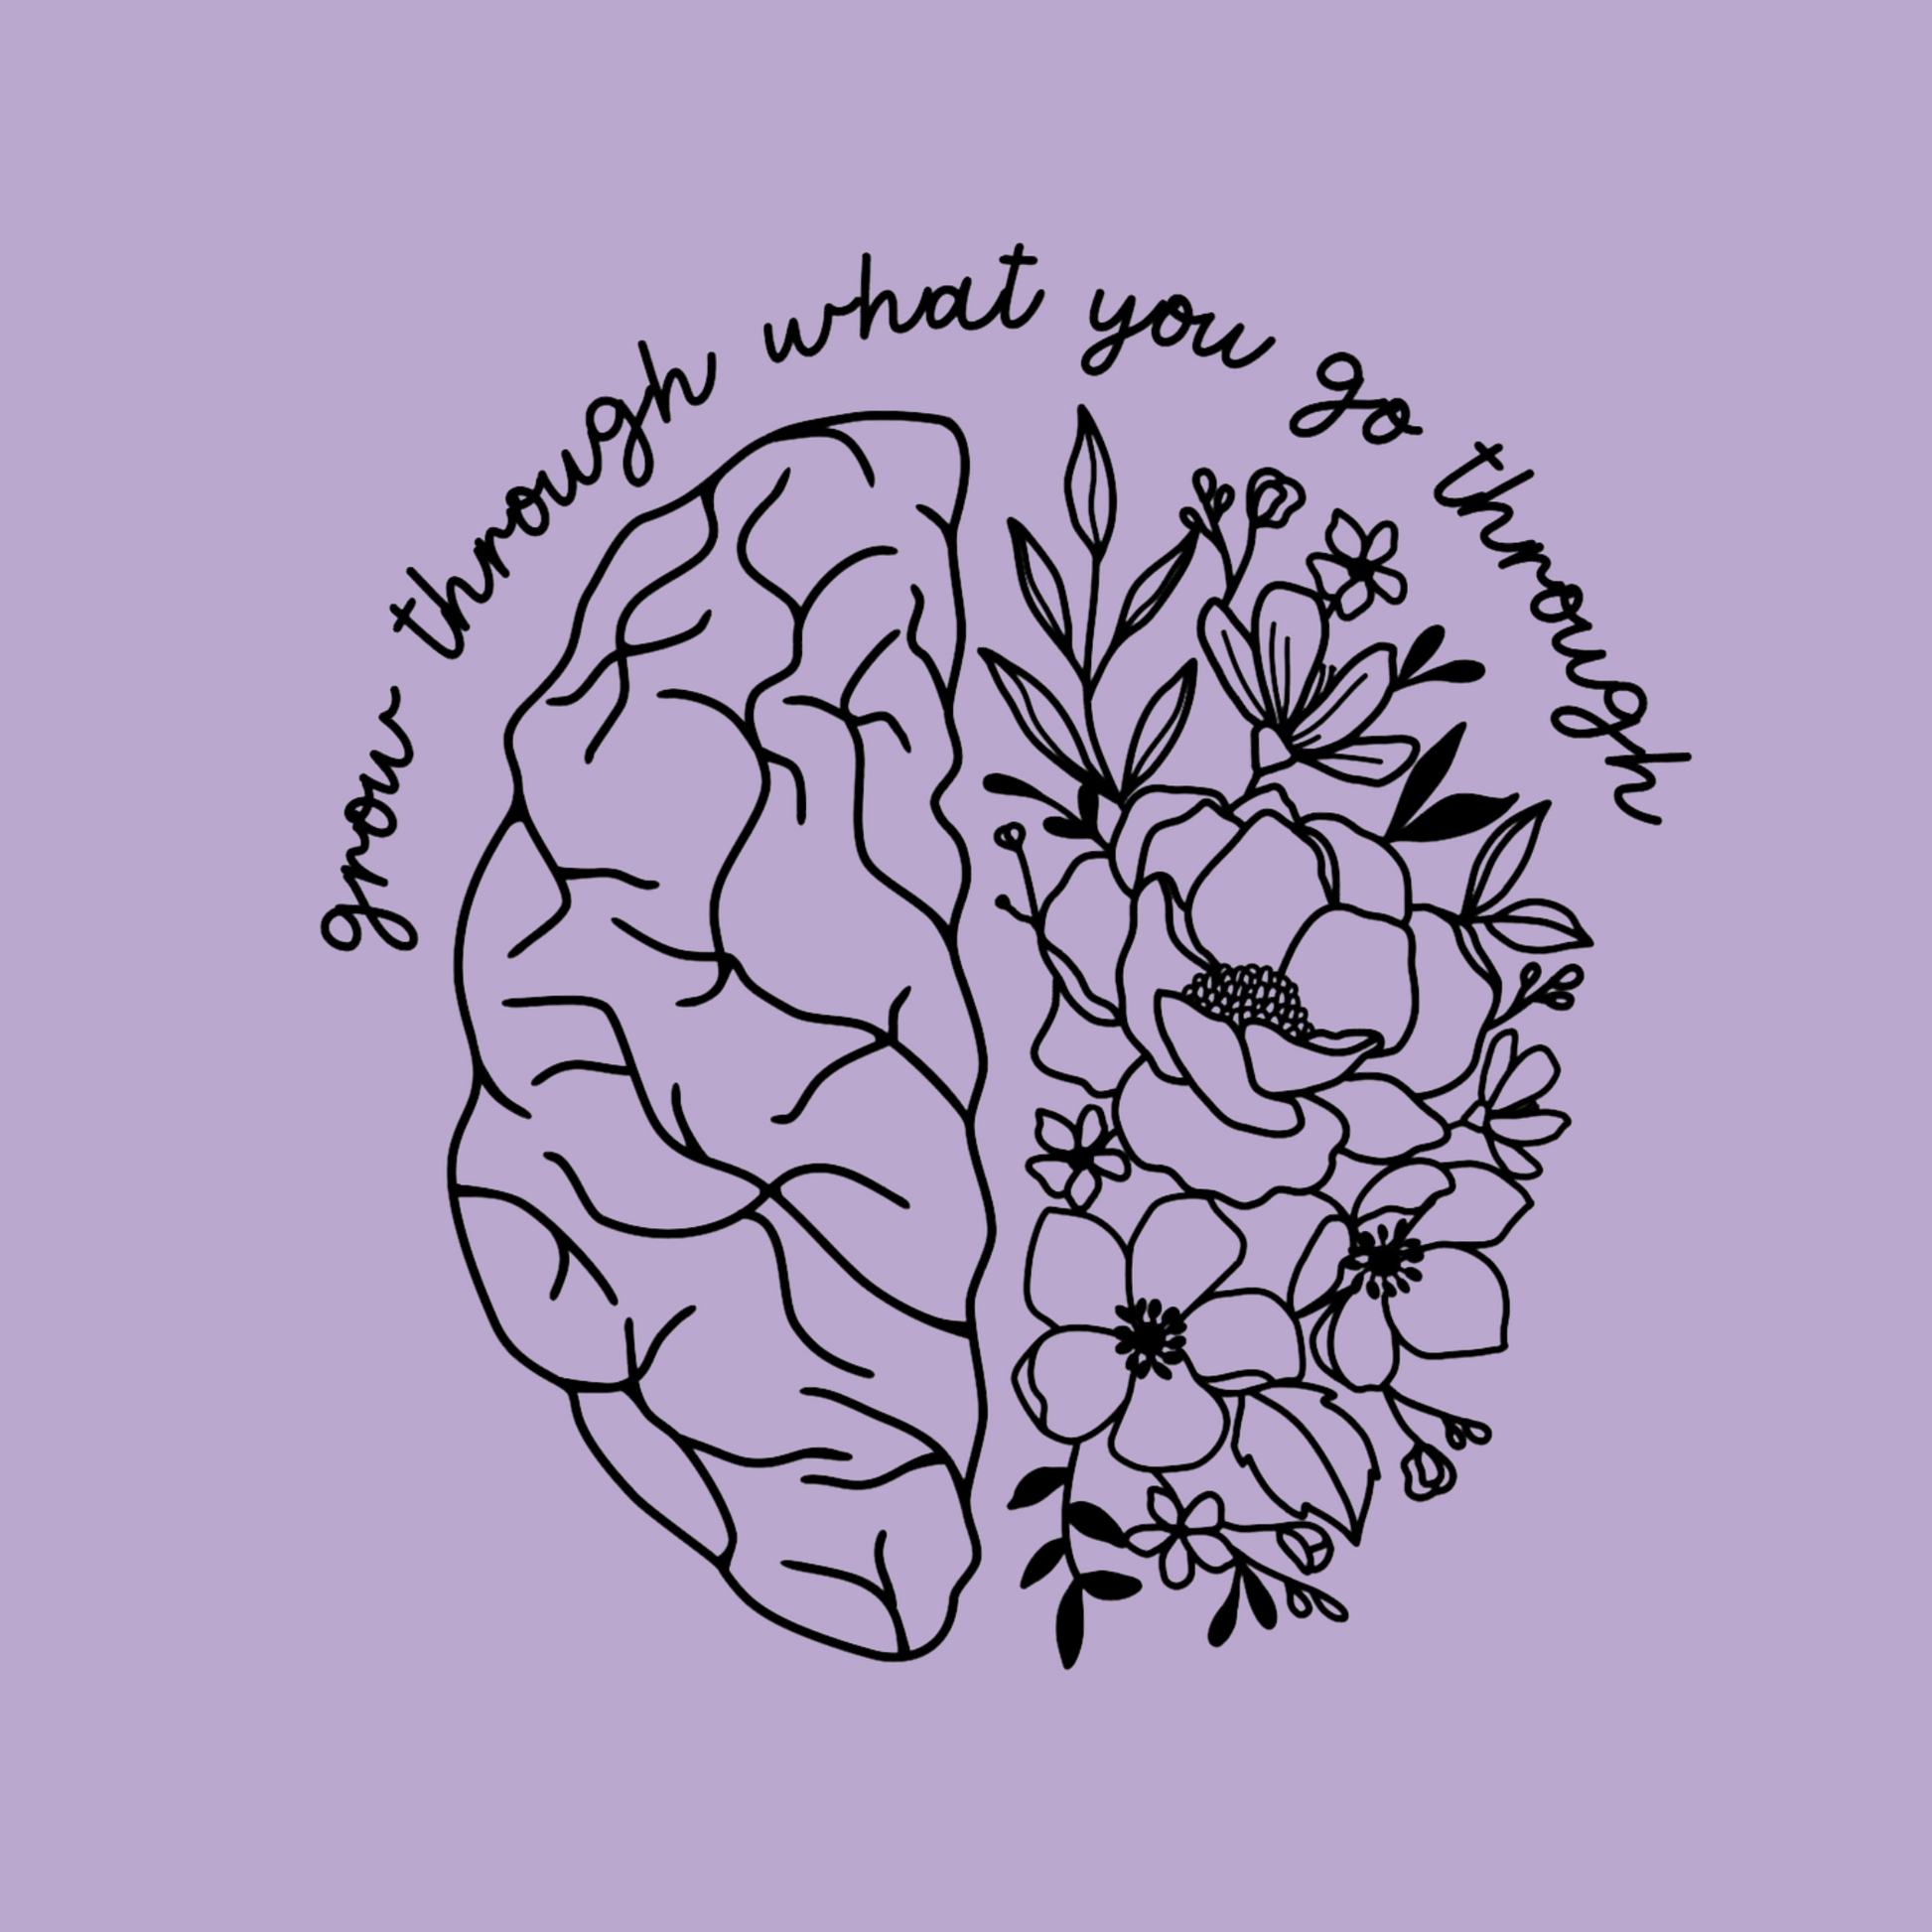 Grow Through Mental Health Brain T-Shirt in purple with a black design on the front. The design has a brain with the left side looking like a brain and the right side being flowers. At the top of the design has a cursive font that says "grow through what you go through". This is an image of the design in black on a purple background.